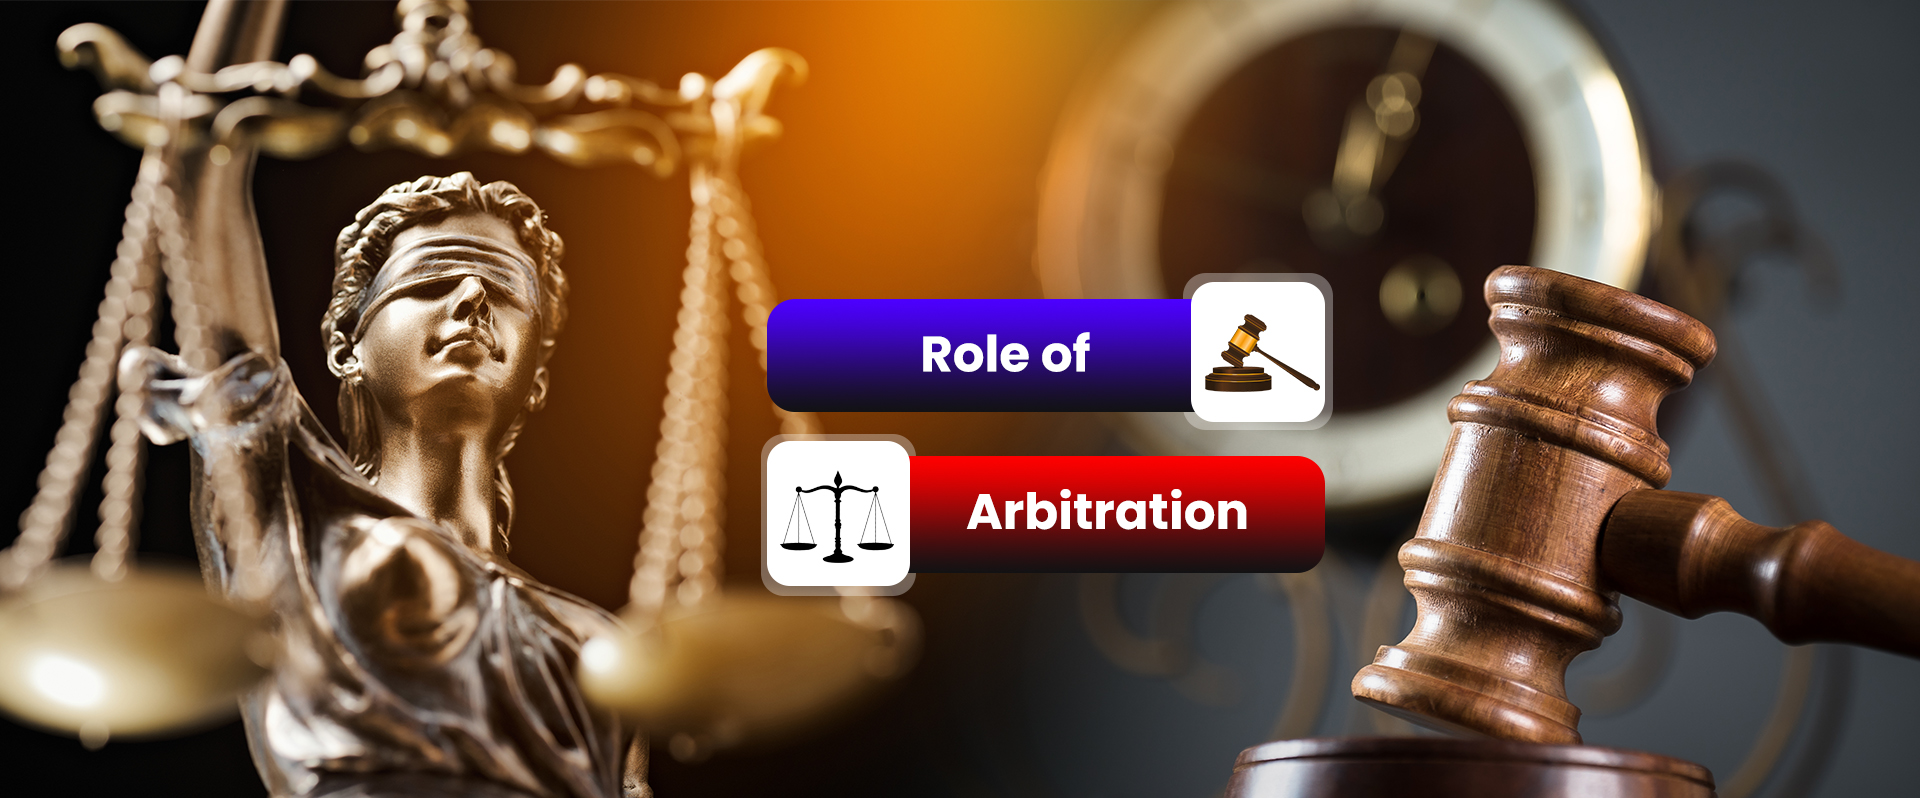 Role of Arbitration